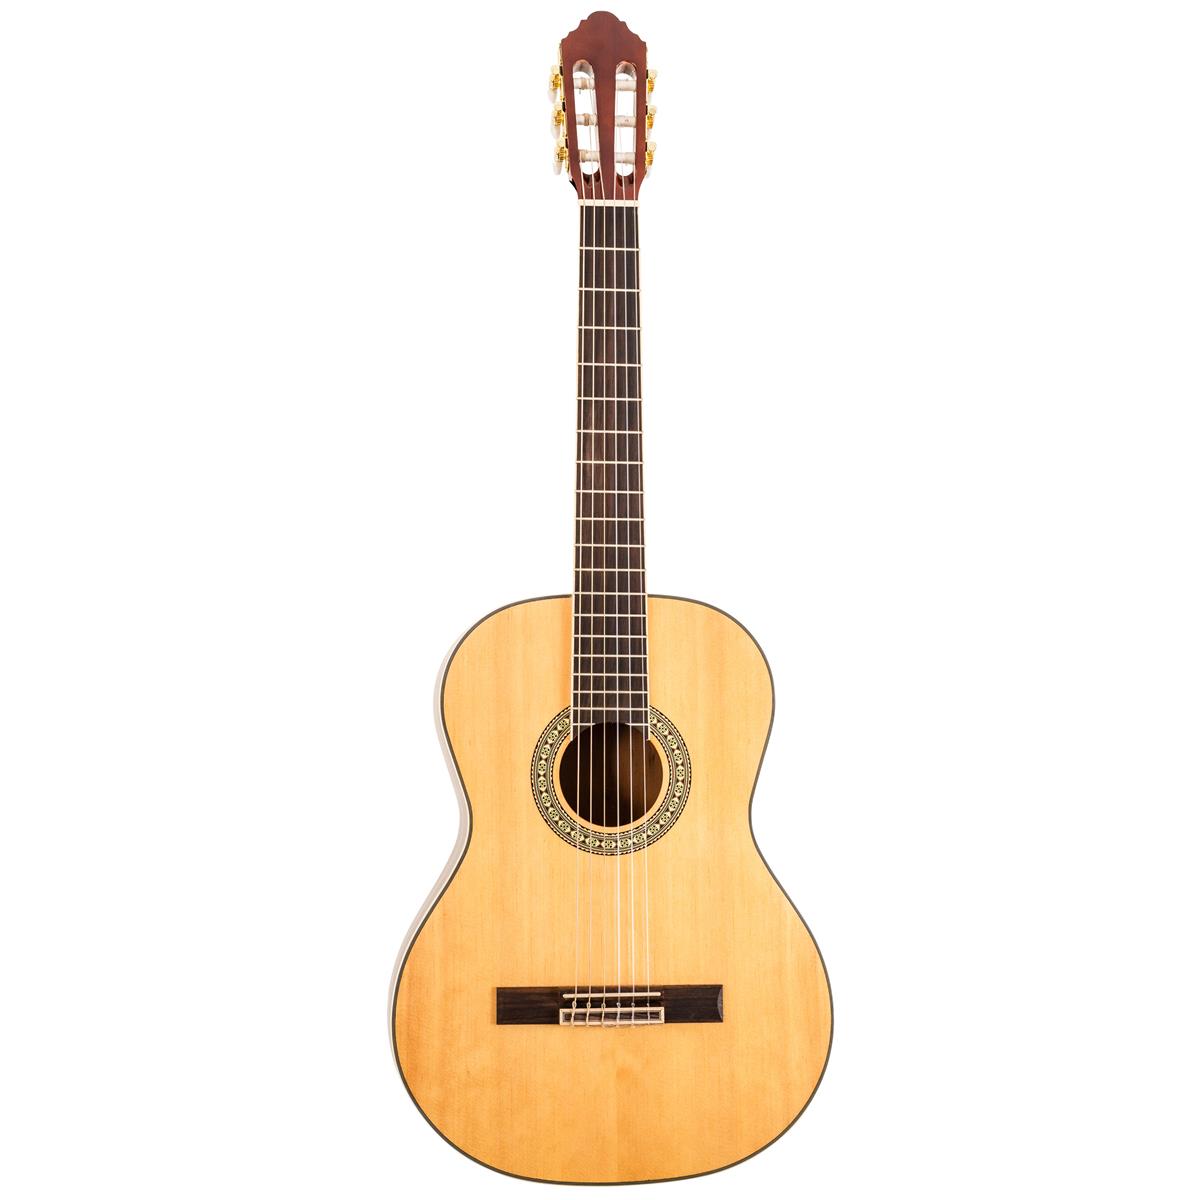 Image of Peavey Delta Woods CNS-2 Classical Nylon String Acoustic Guitar